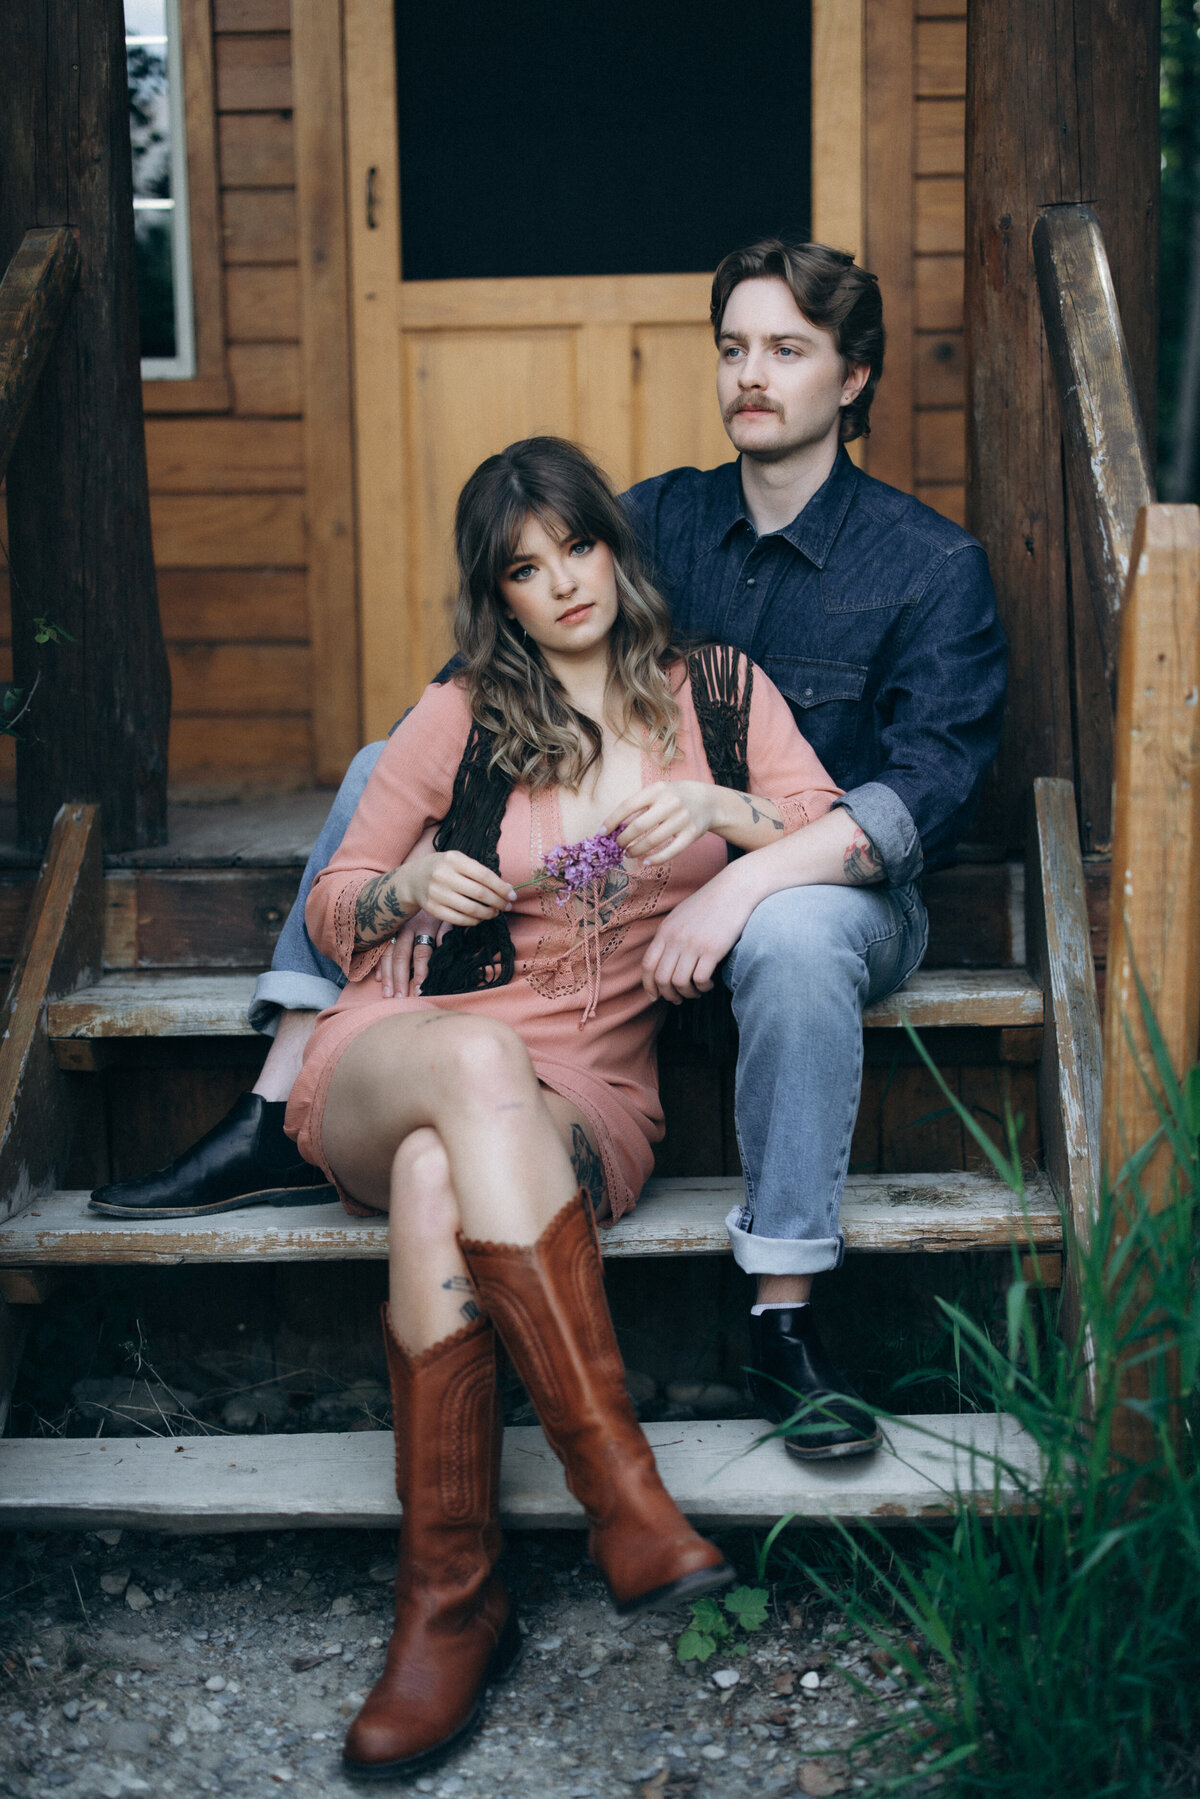 vpc-couples-vintage-cabin-shoot-32